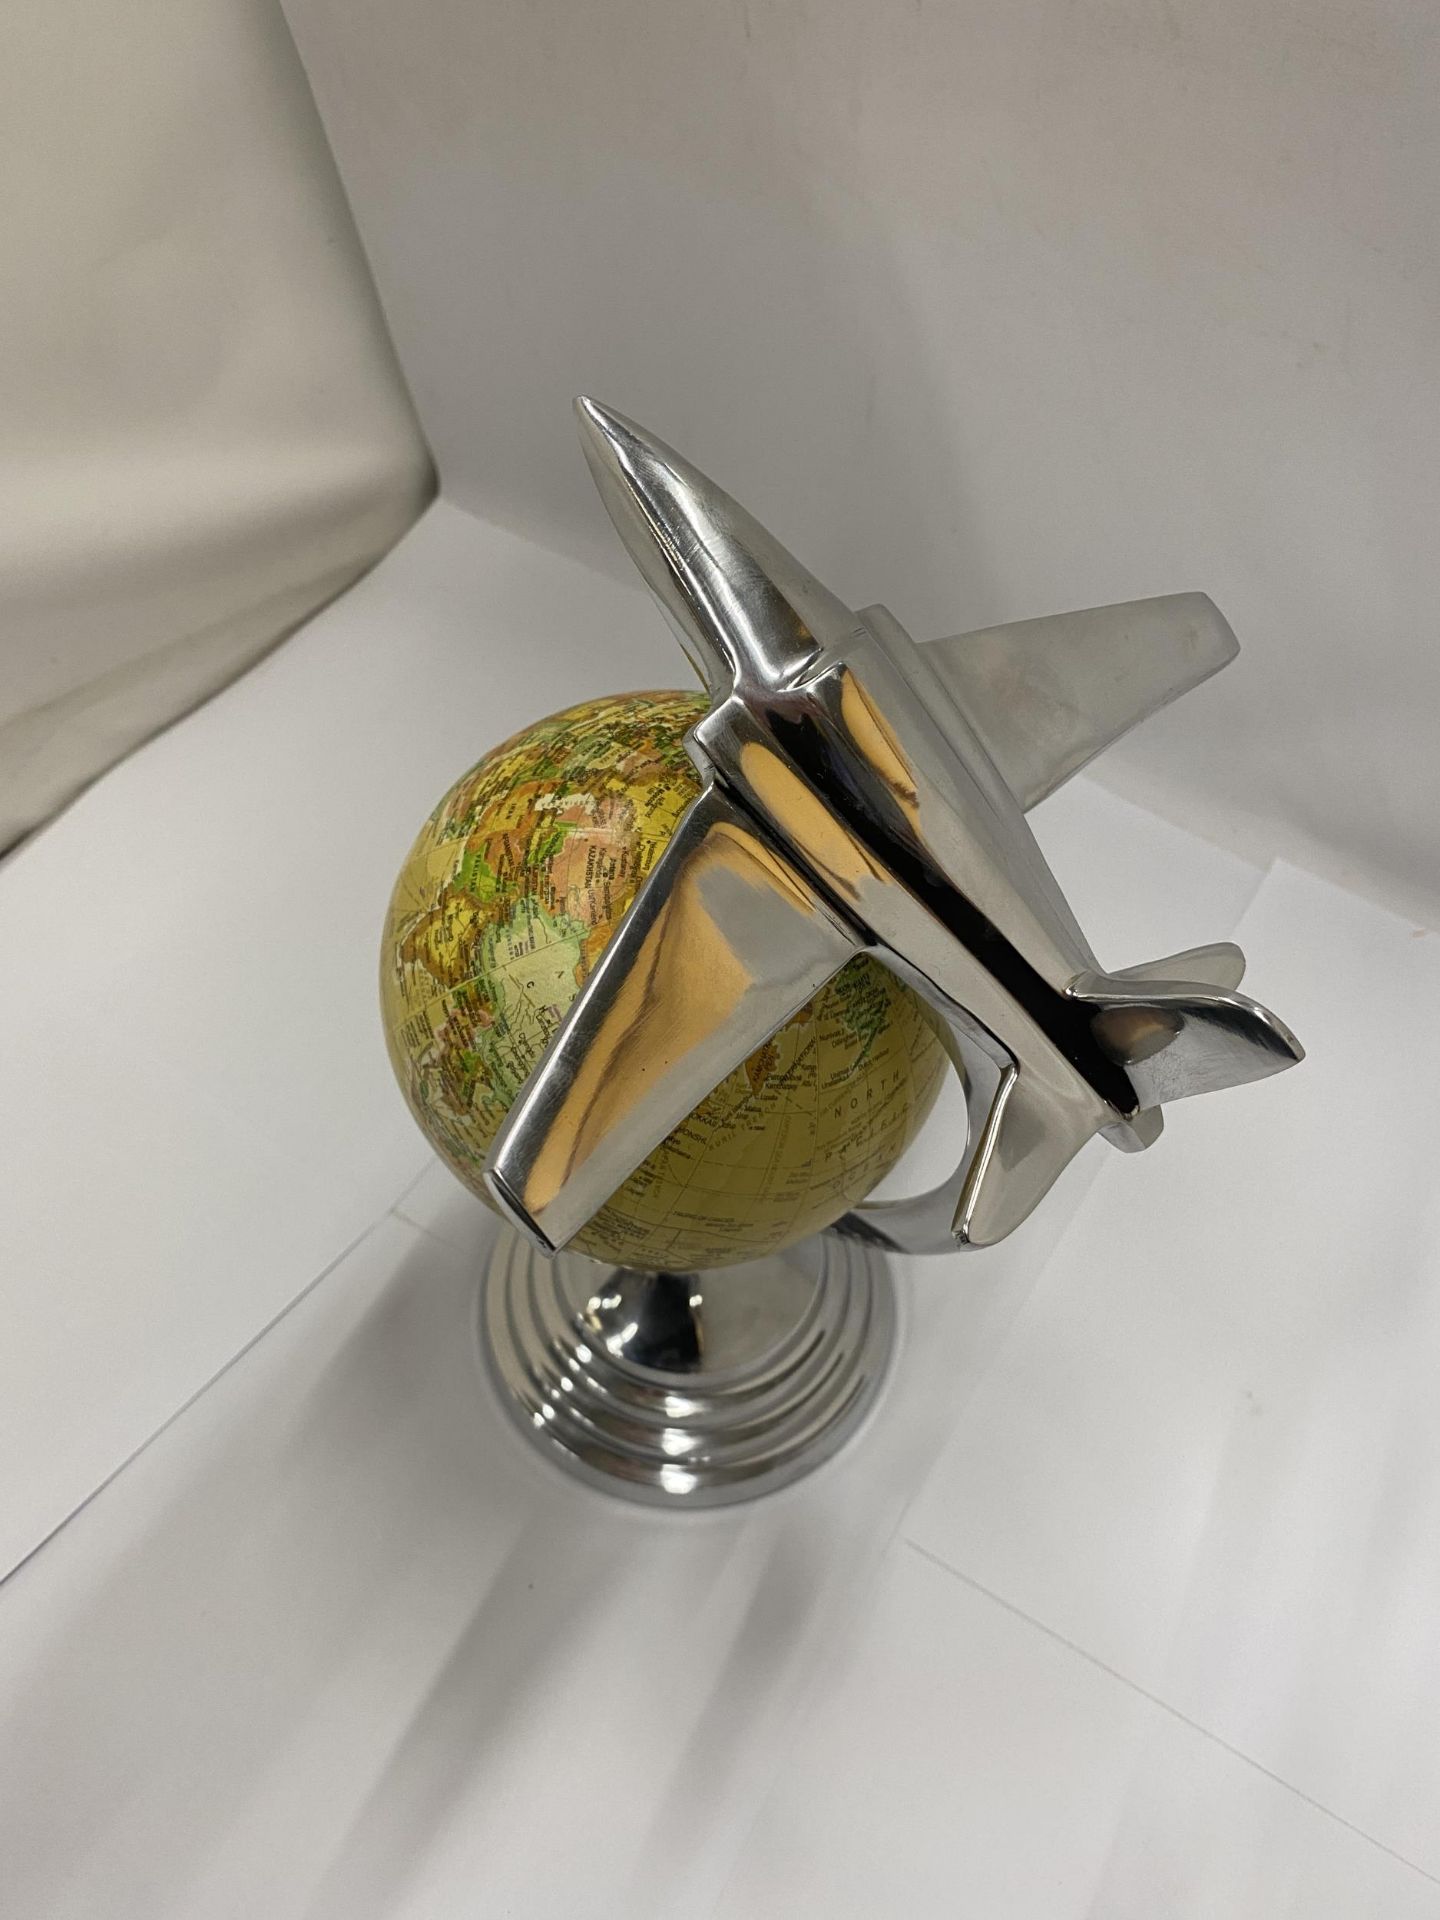 A DESK GLOBE WITH CHROME EFFECT BASE AND AEROPLANE DESIGN - Image 2 of 3